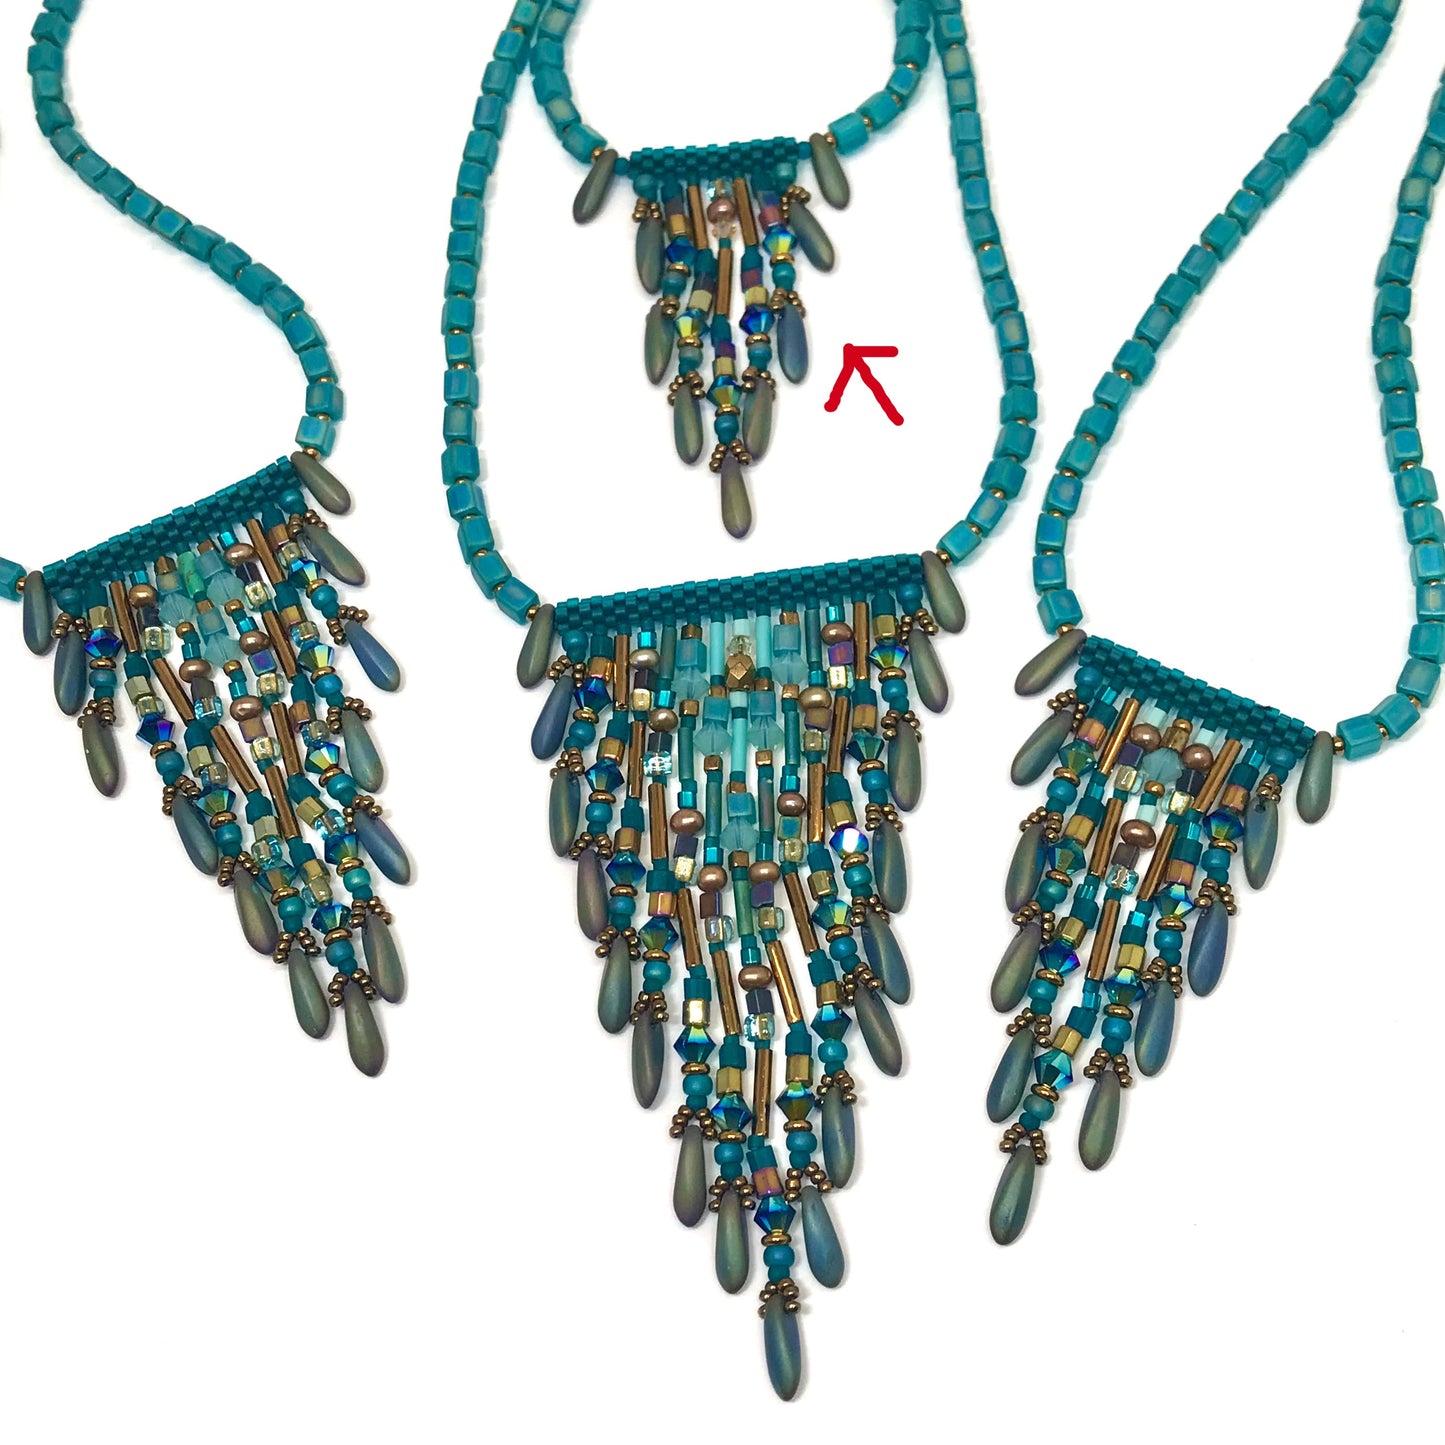 Fringy Teal Necklace 7 strands